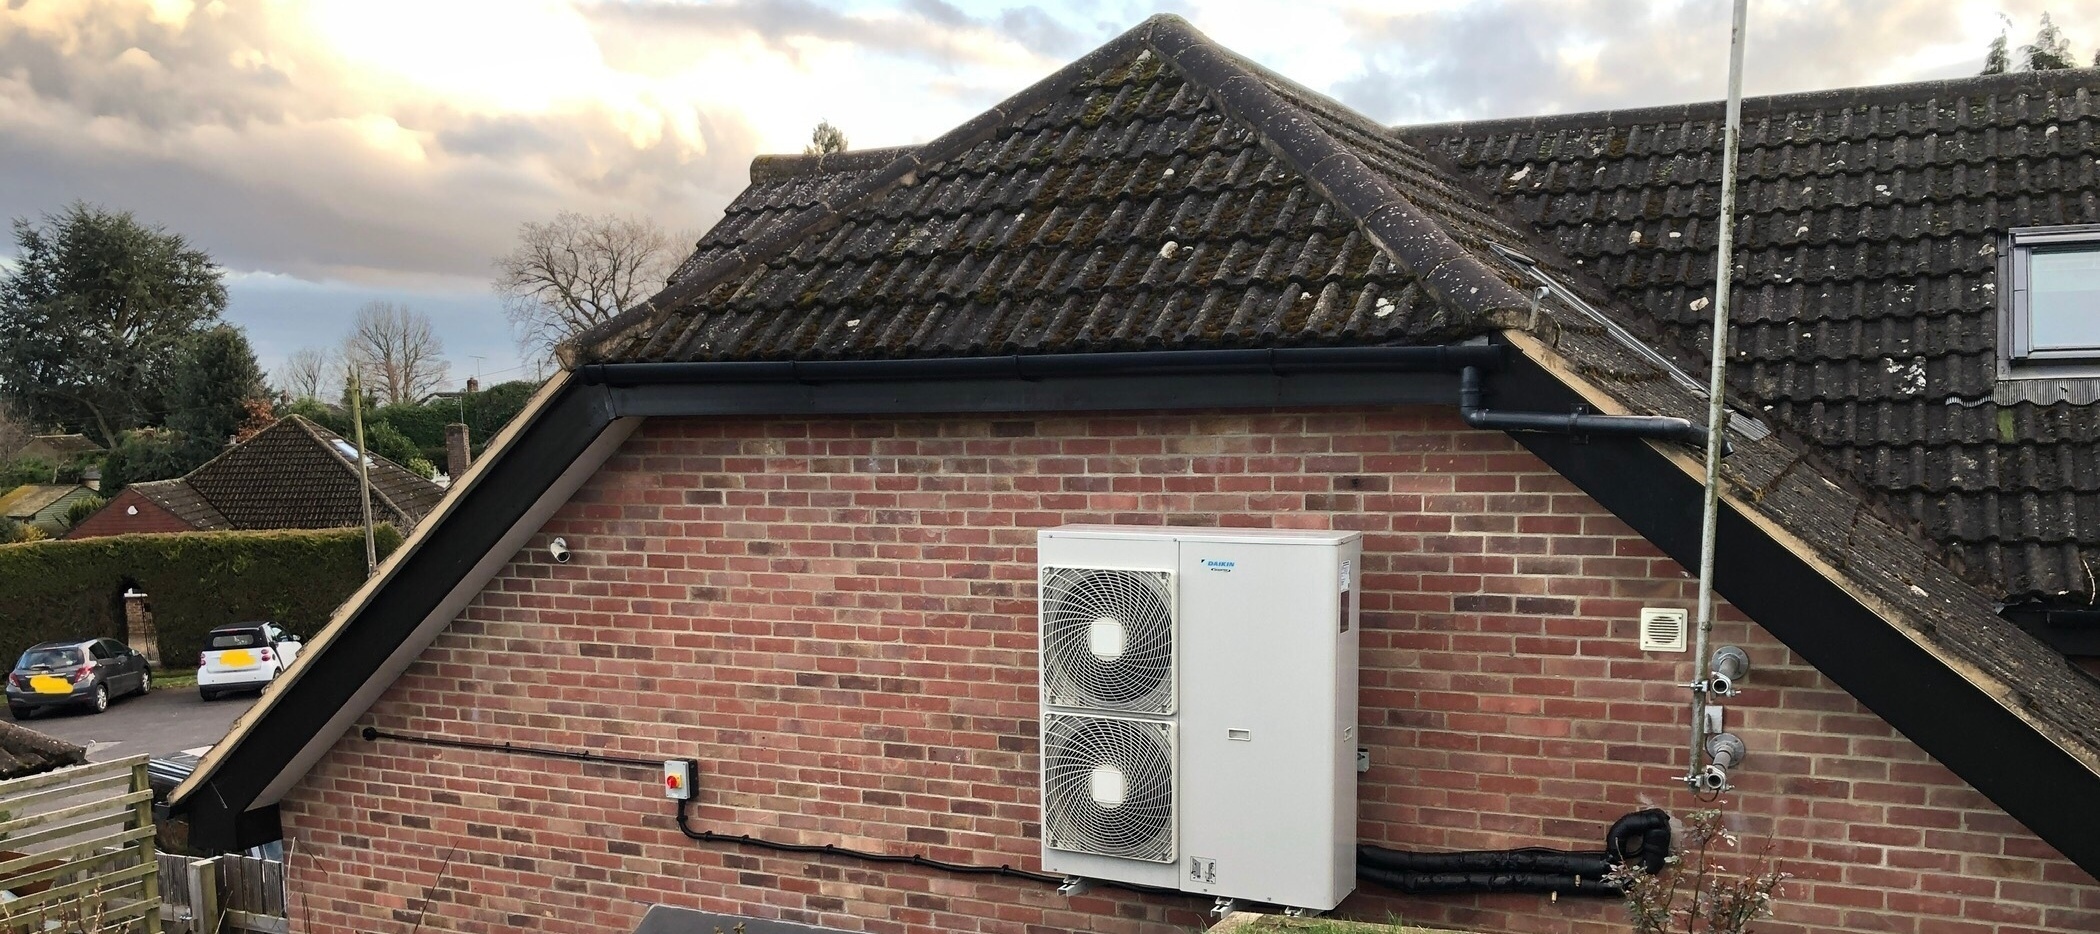 Correctly sizing Air Source Heat Pumps (ASHP) - Bigger is not always better